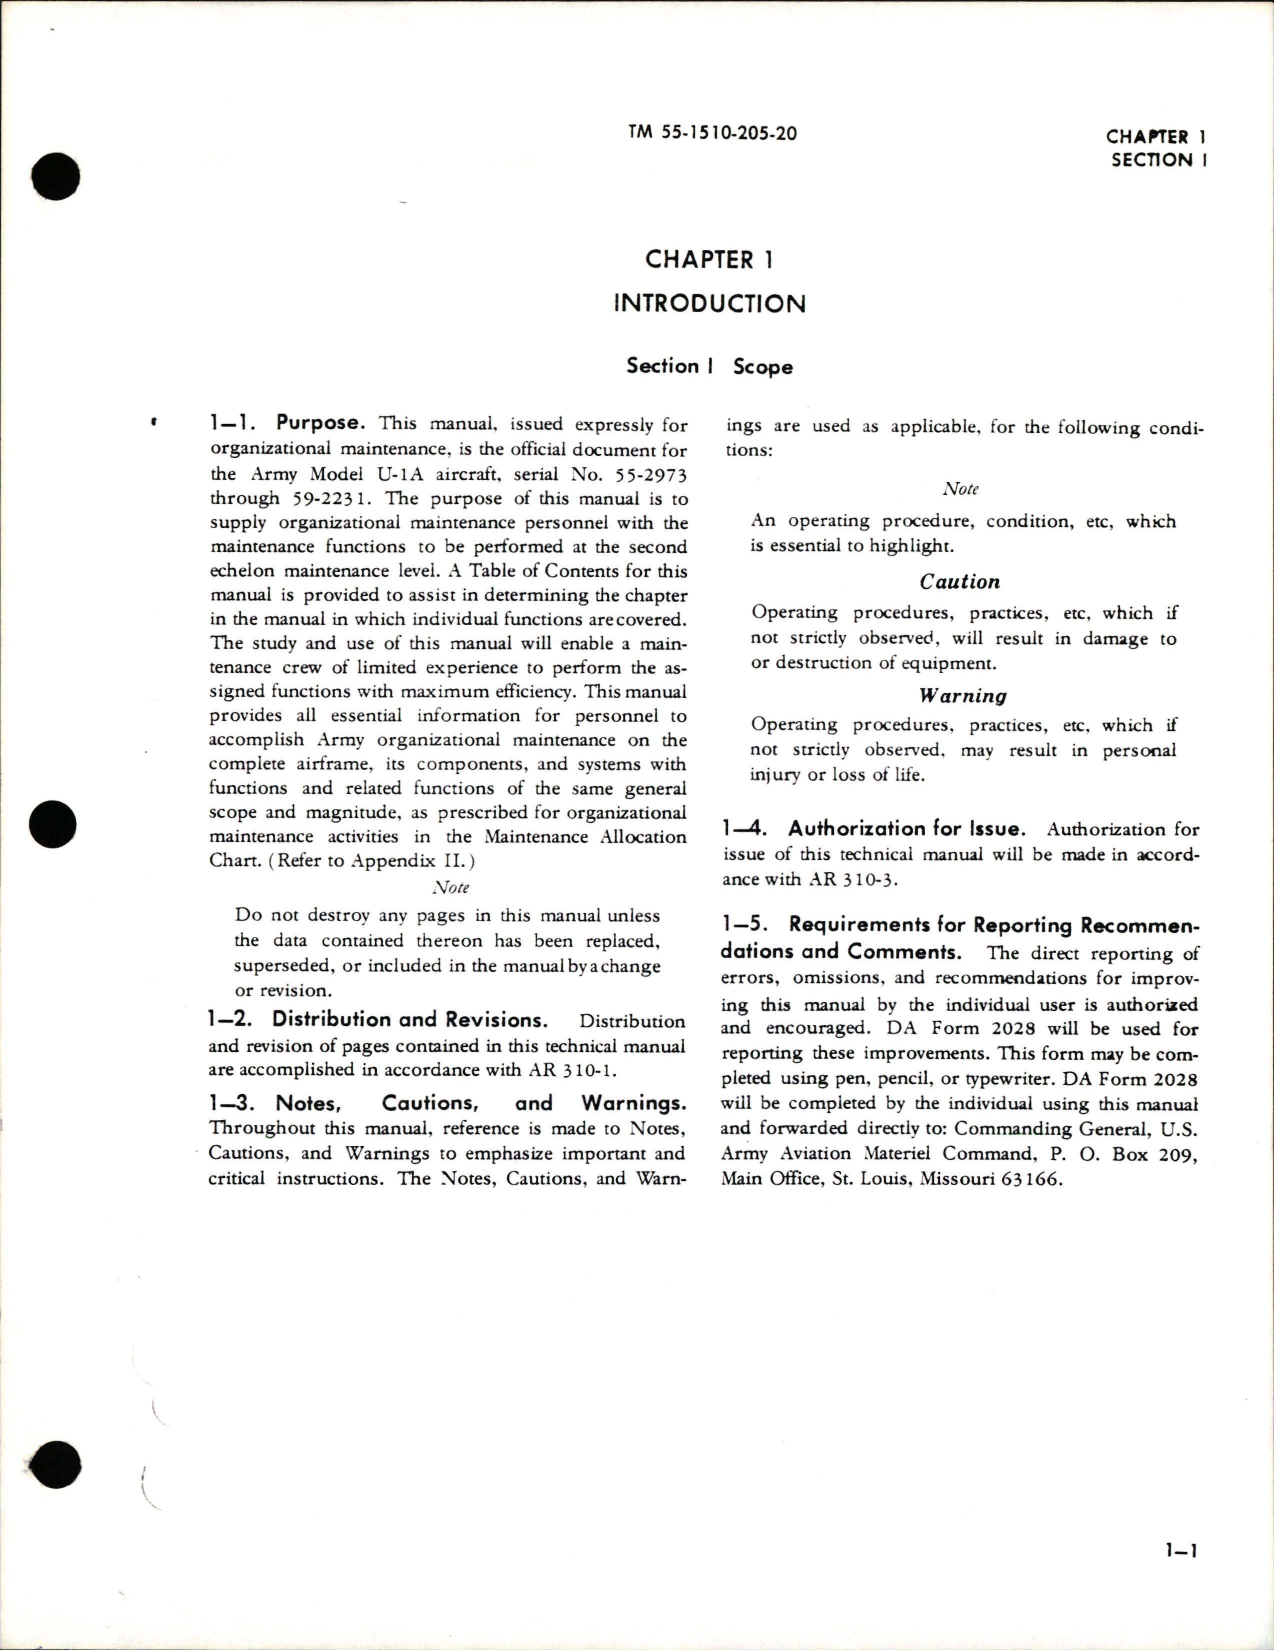 Sample page 5 from AirCorps Library document: Organizational Maintenance Manual for U-1A Otter